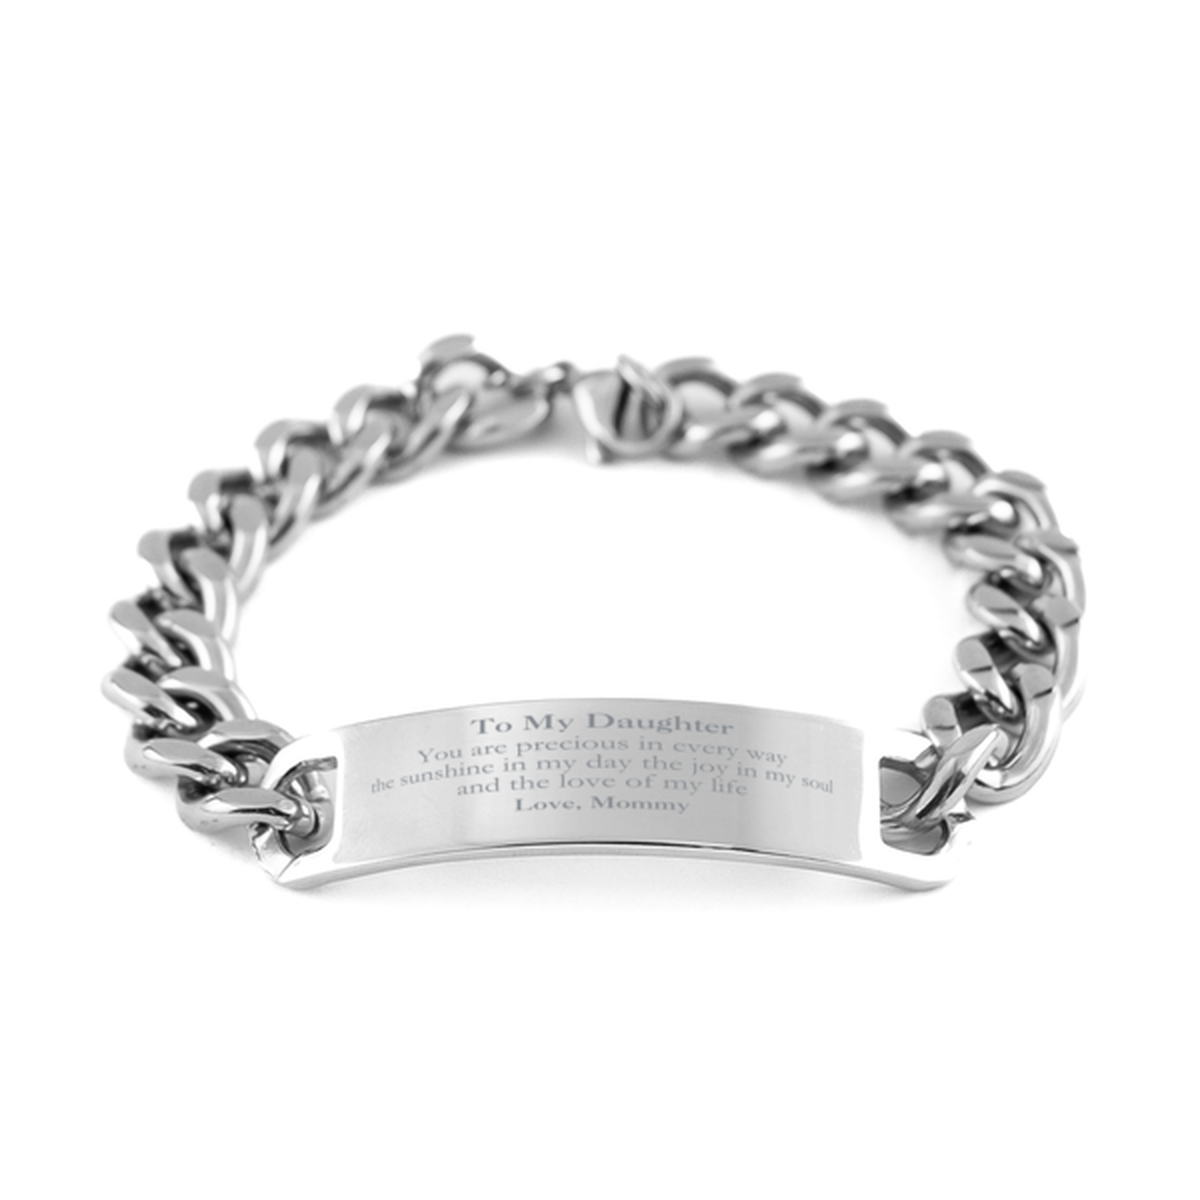 Graduation Gifts for Daughter Cuban Chain Stainless Steel Bracelet Present from Mommy, Christmas Daughter Birthday Gifts Daughter You are precious in every way the sunshine in my day. Love, Mommy